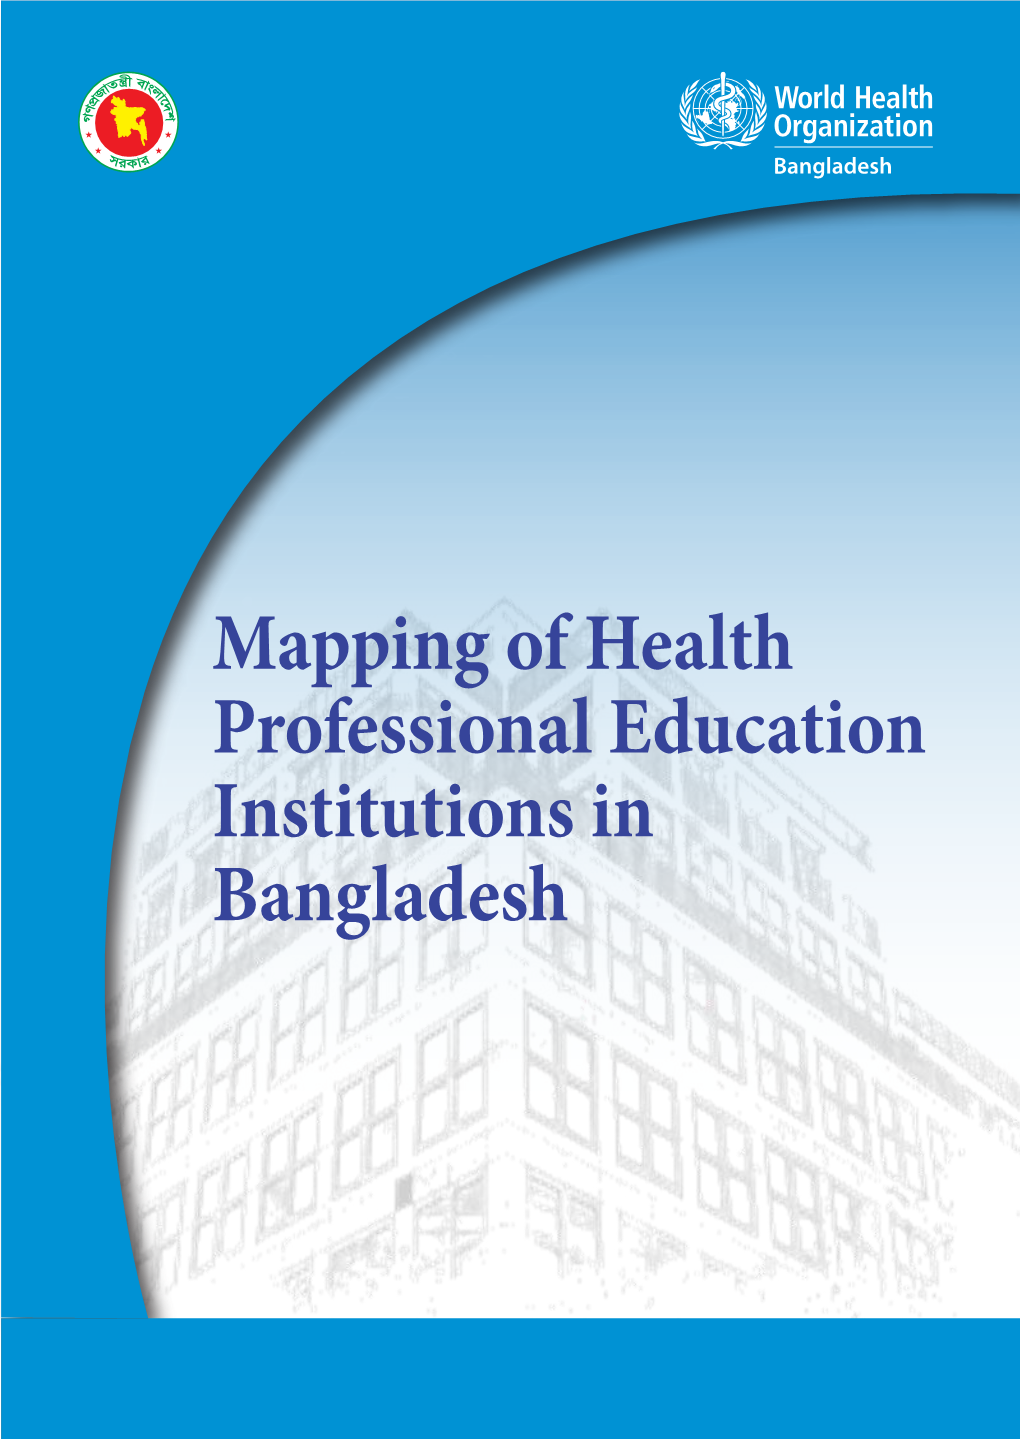 Mapping of Health Professional Education Institutions in Bangladesh